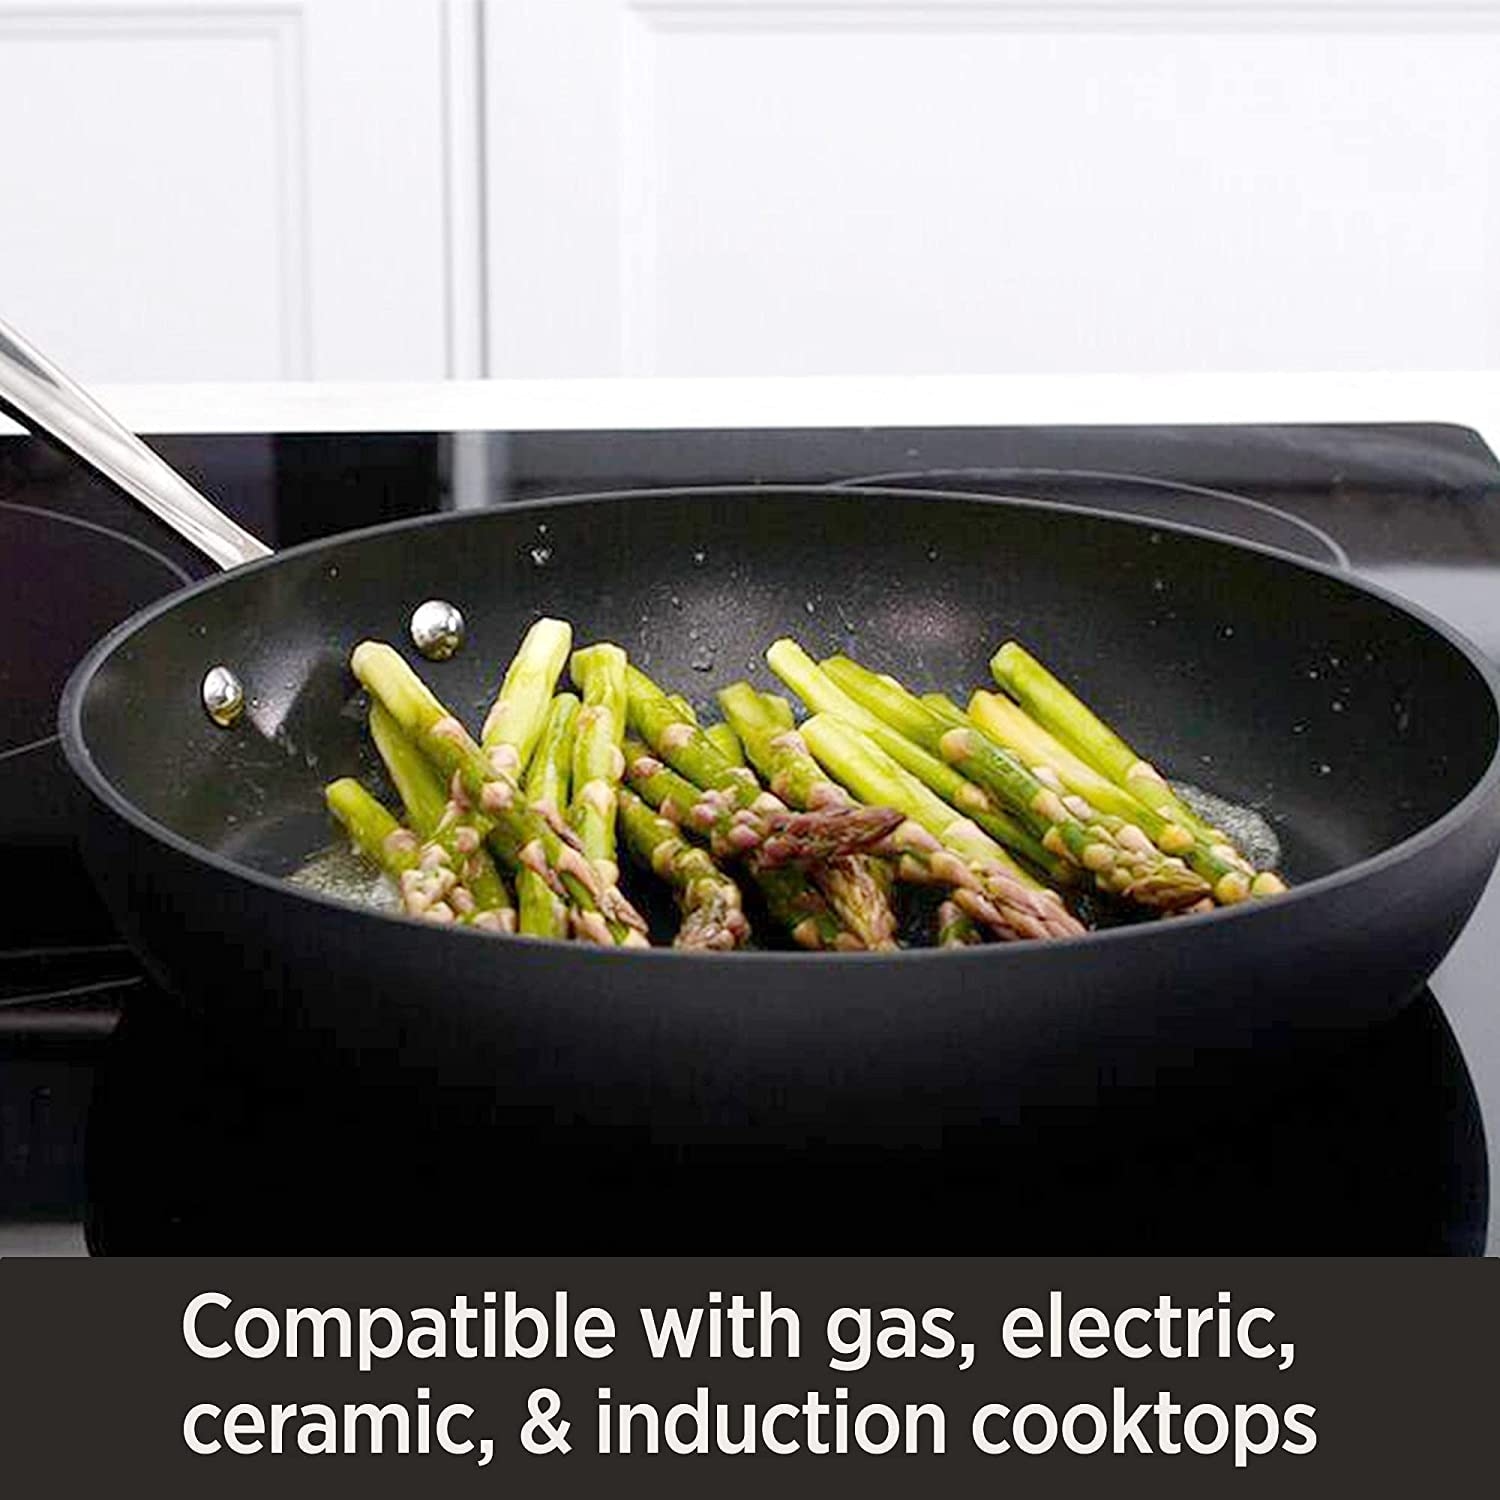 https://ak1.ostkcdn.com/images/products/is/images/direct/5eeb6df4cf312566cc69b3a24122032190fcf180/All-Clad-HA1-Hard-Anodized-Nonstick-5-Piece-Fry-Pan-Set-8%2C-10%2C-12-Inch-Induction-Pots-and-Pans%2C-Cookware-Black.jpg